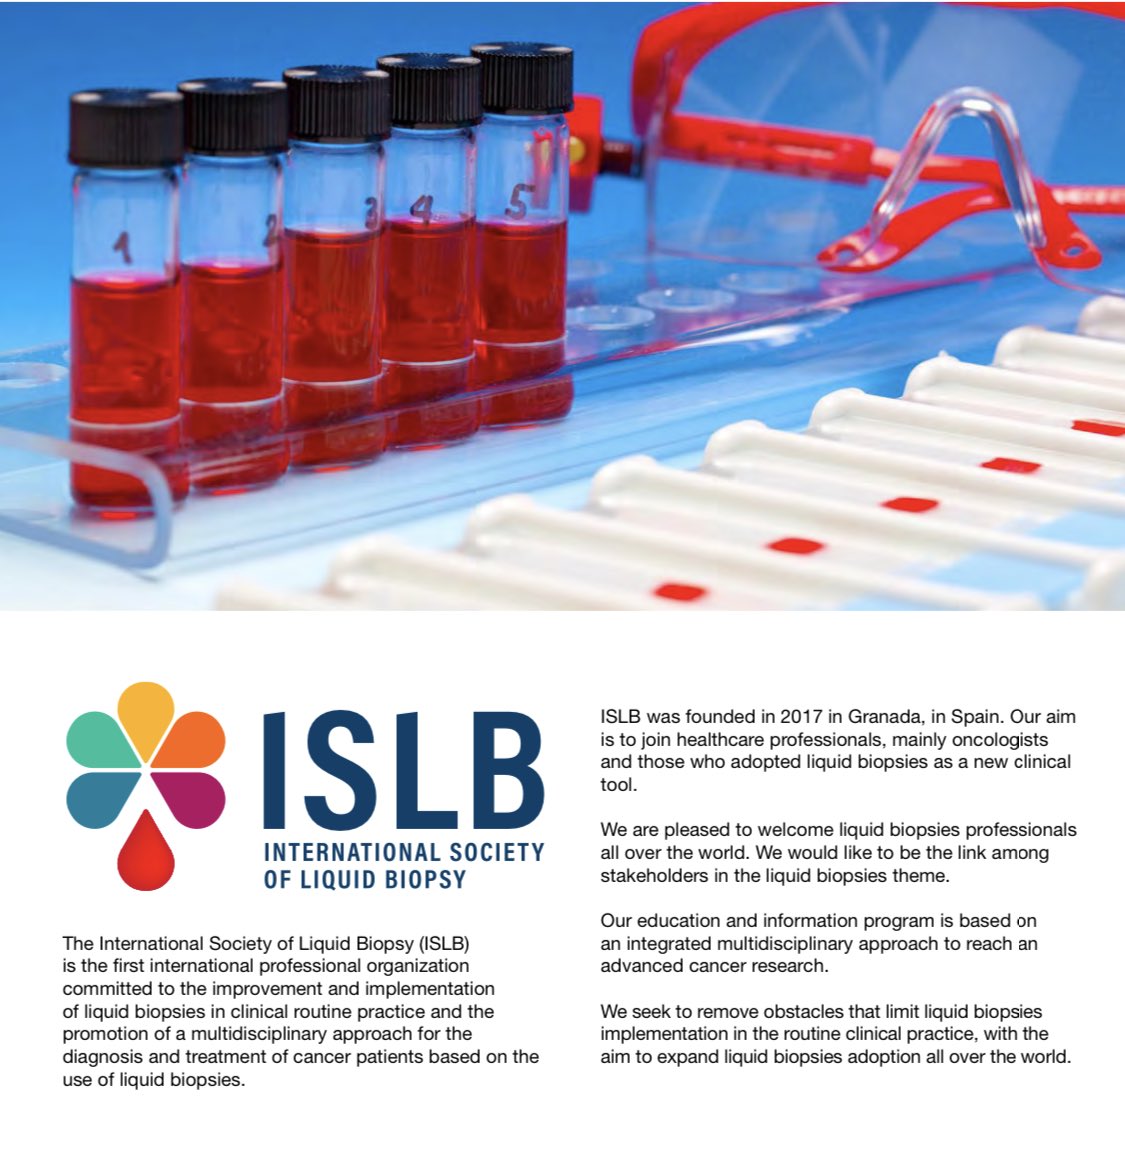 If you are interested in liquid biopsy 🩸field, joint a vibrant society with a multidisciplinary, international members around the world 🌎 More info at ISLB.info ⁦@isliquidbiopsy⁩ ⁦